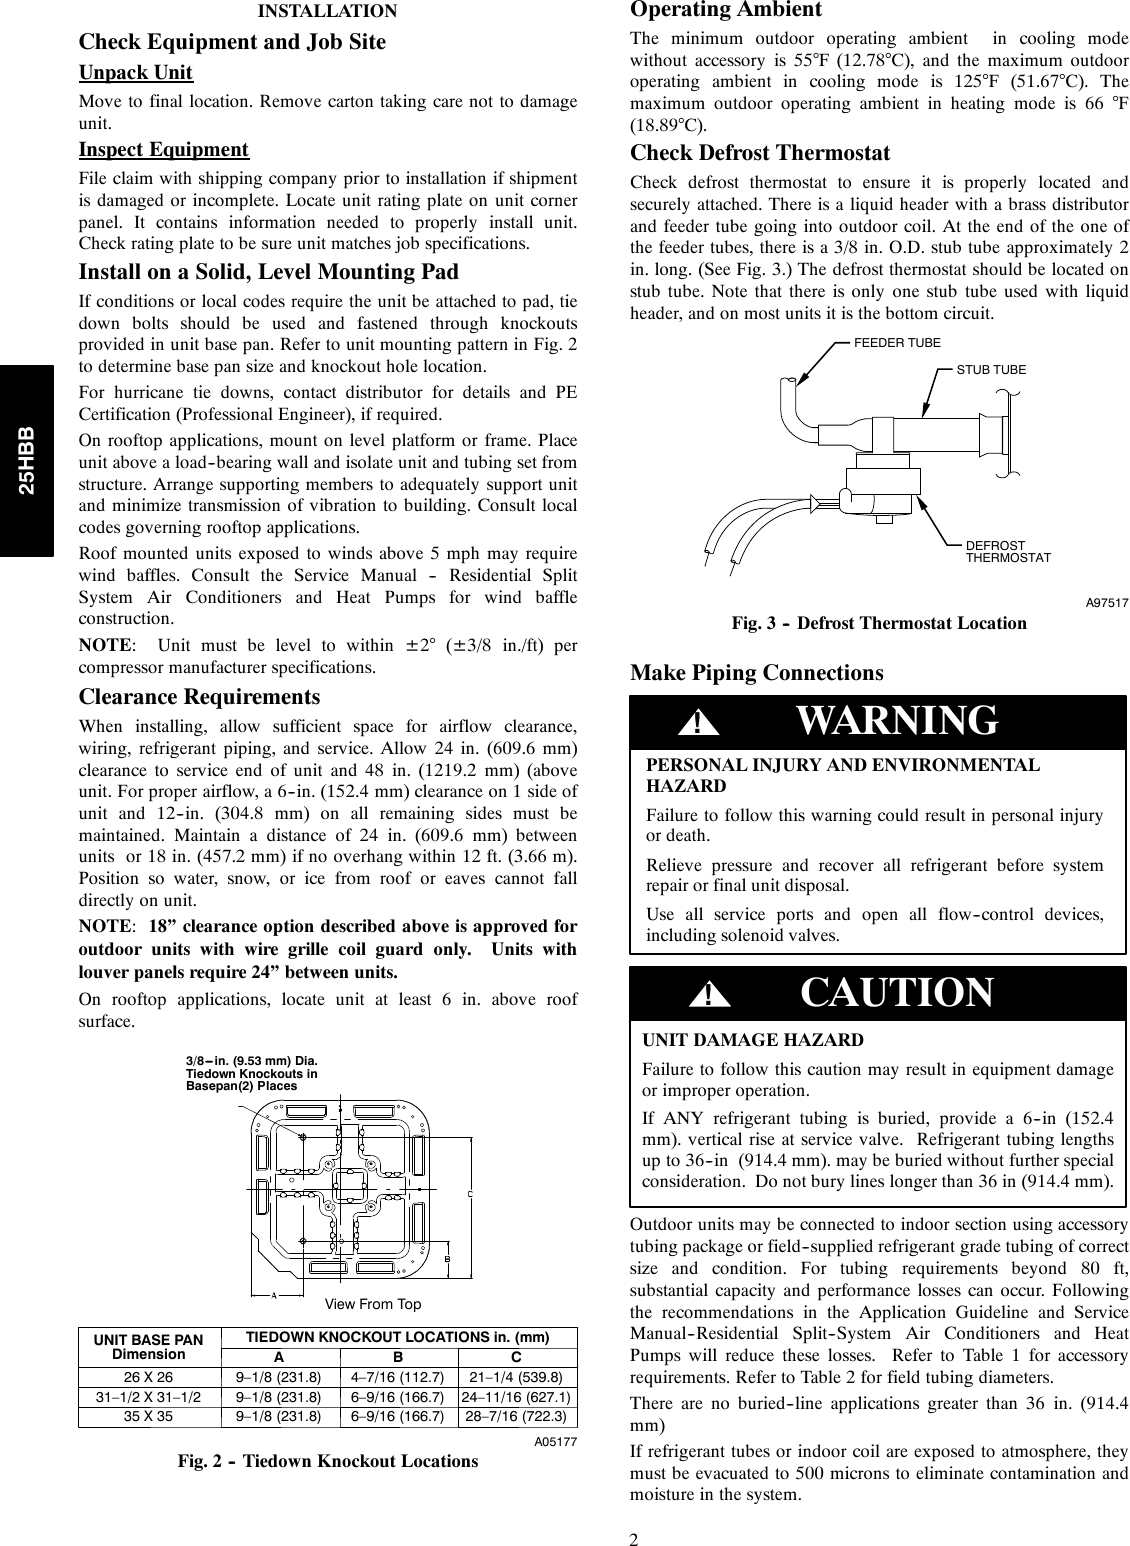 Page 2 of 8 - Carrier Carrier-25Hbb-Users-Manual- 25hbb-1si  Carrier-25hbb-users-manual